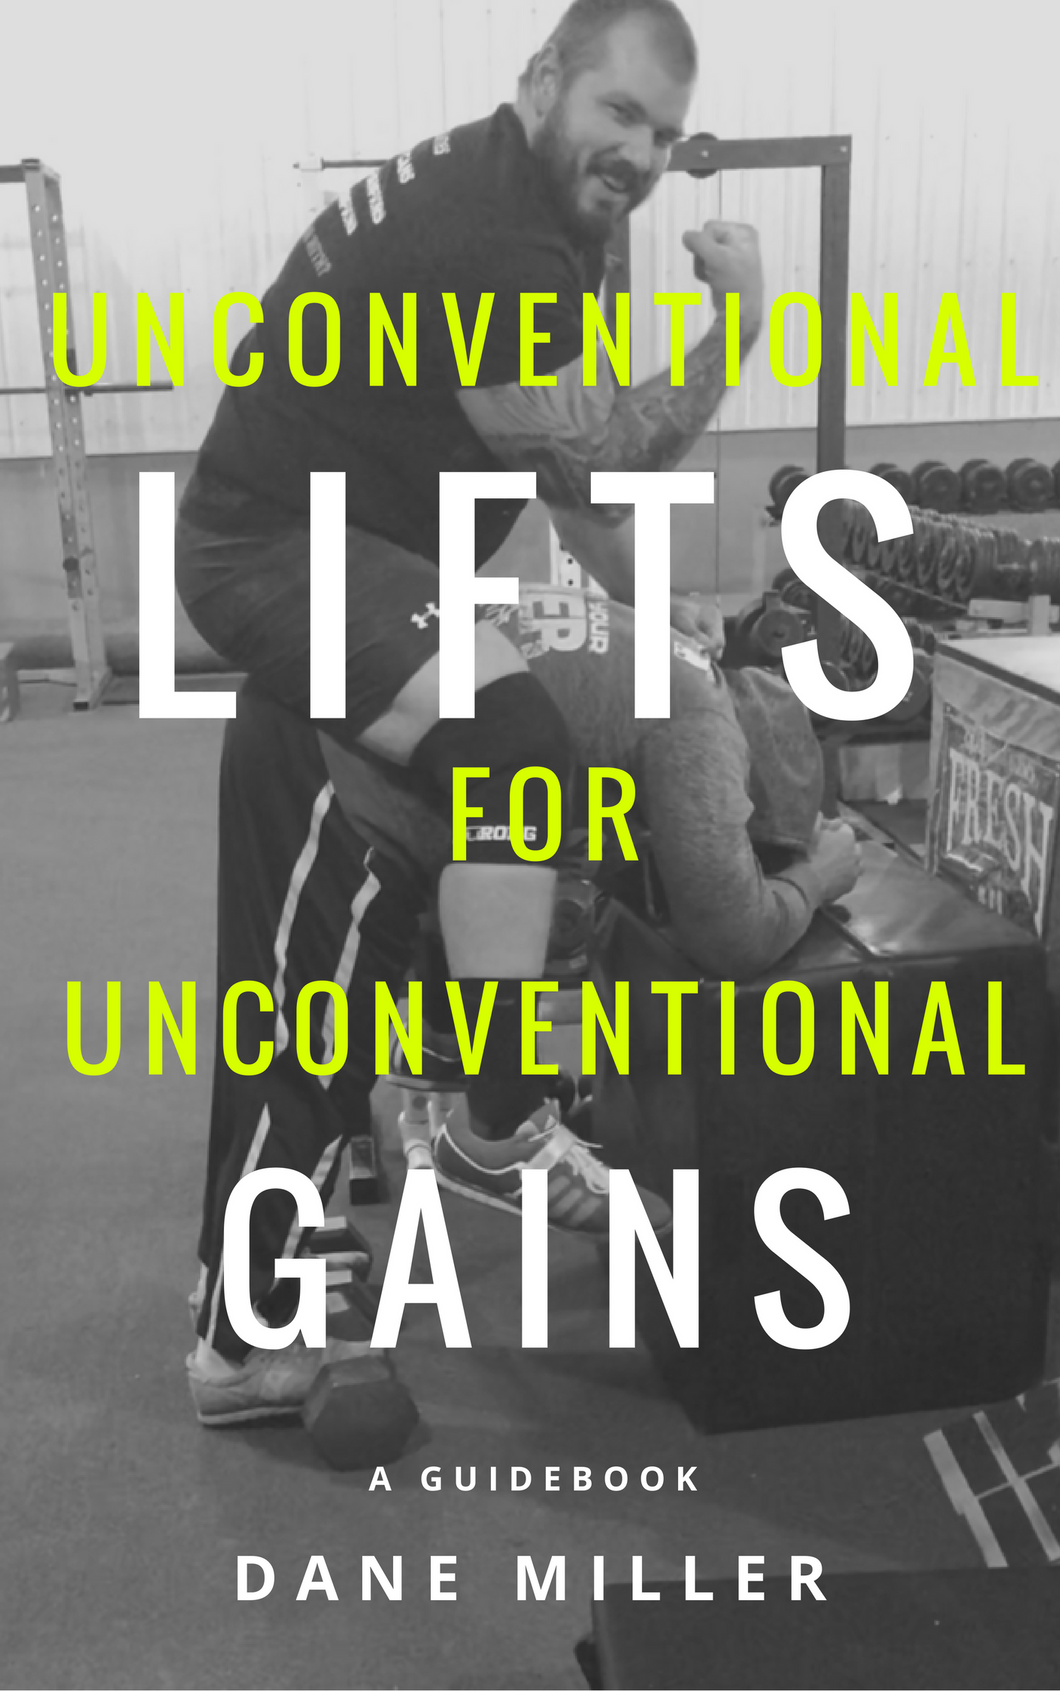 Unconventional Lifts for Unconventional Gains - eBook version